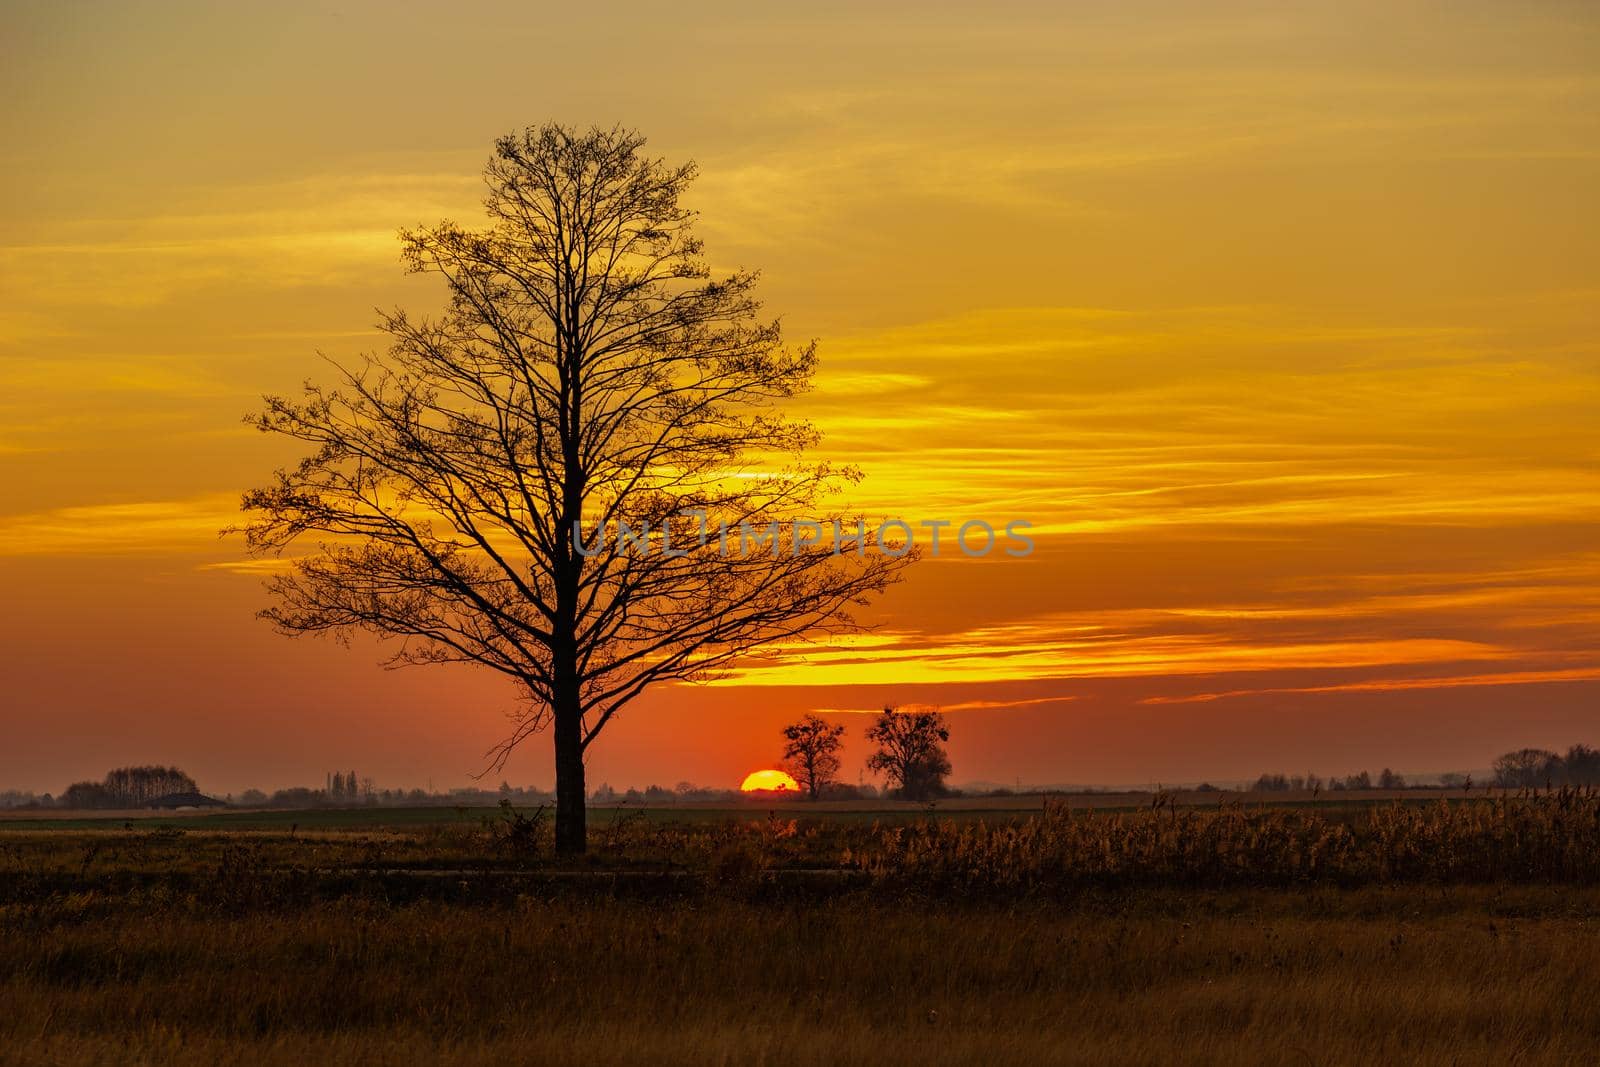 Big tree and orange sky during sunset, autumn view